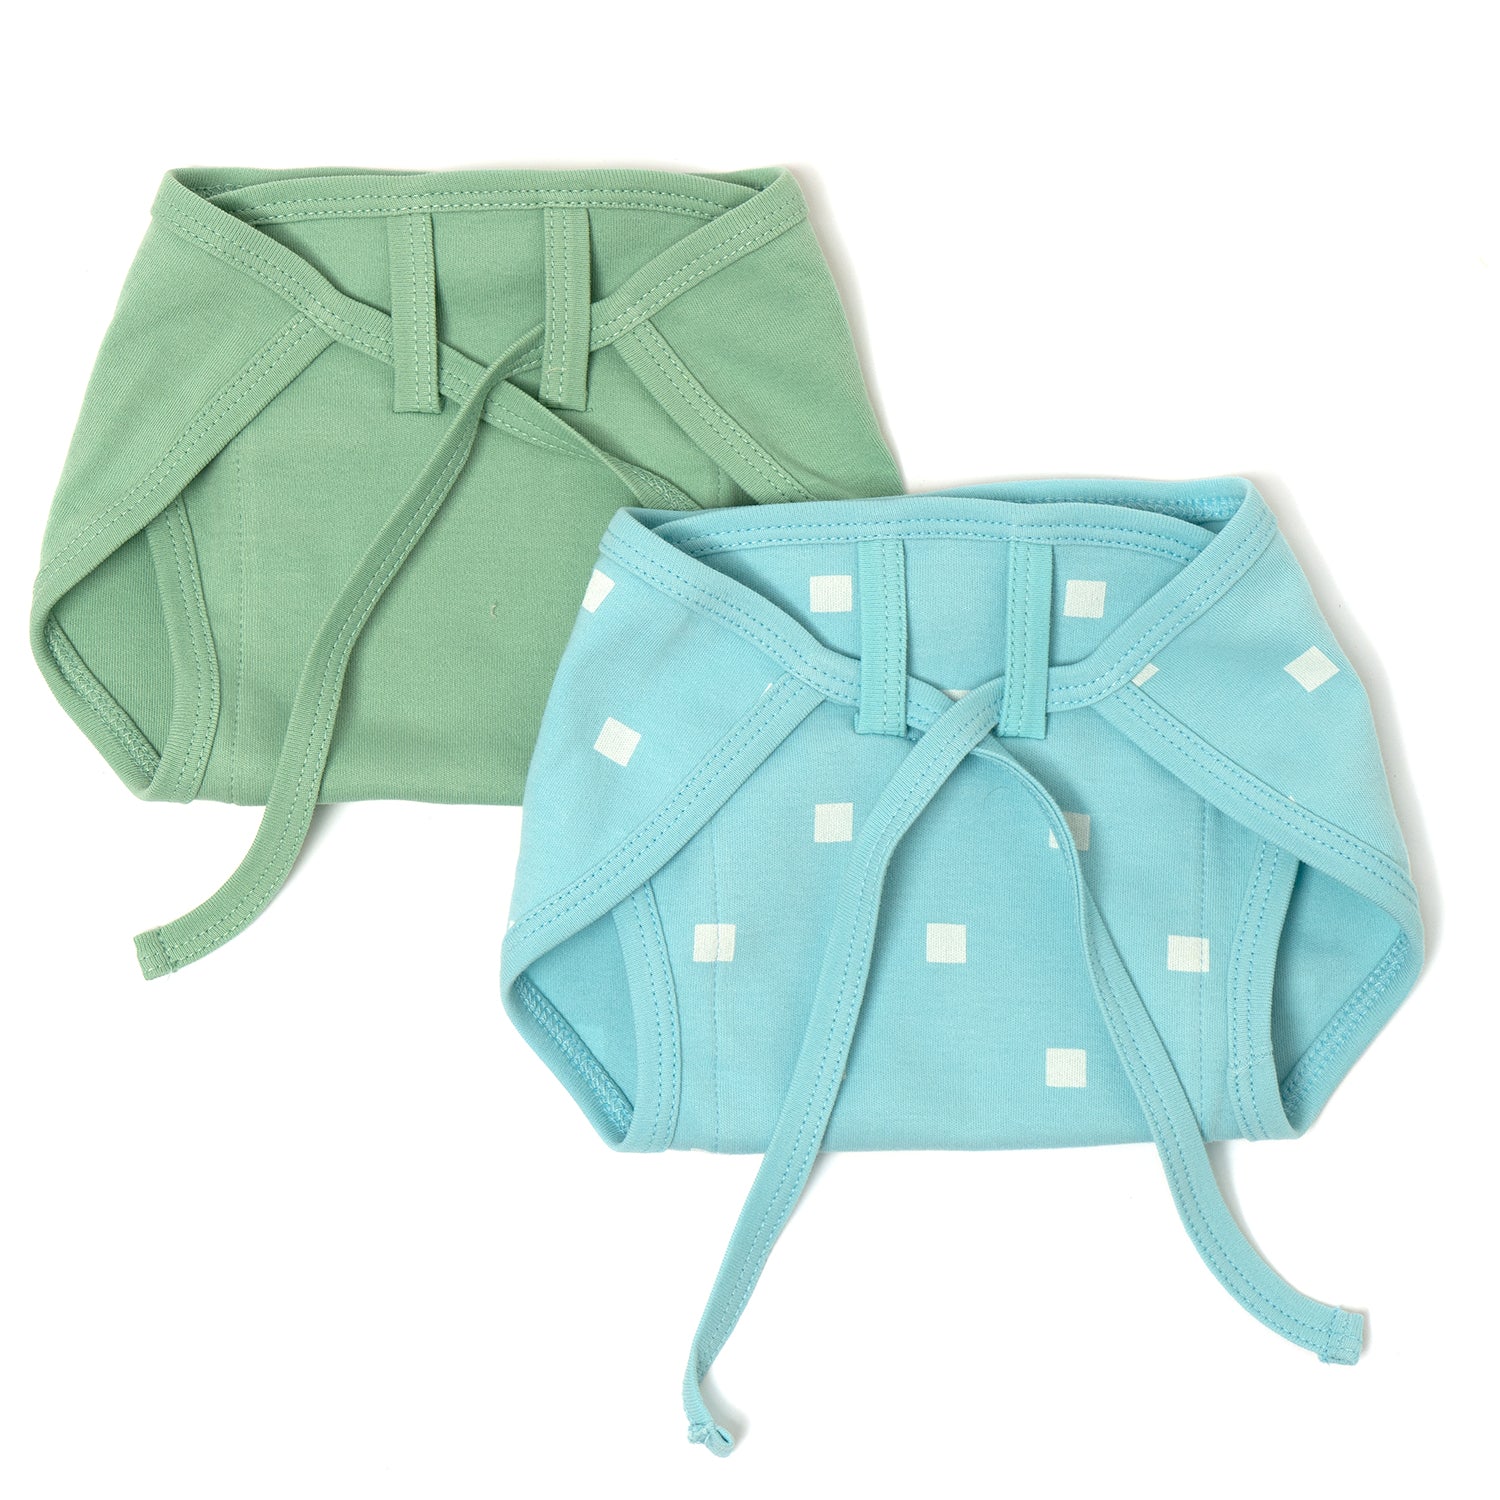 100% Cotton Jersey Nappies [Set - 4] Pack of 2 Solid Green & Blue Polka